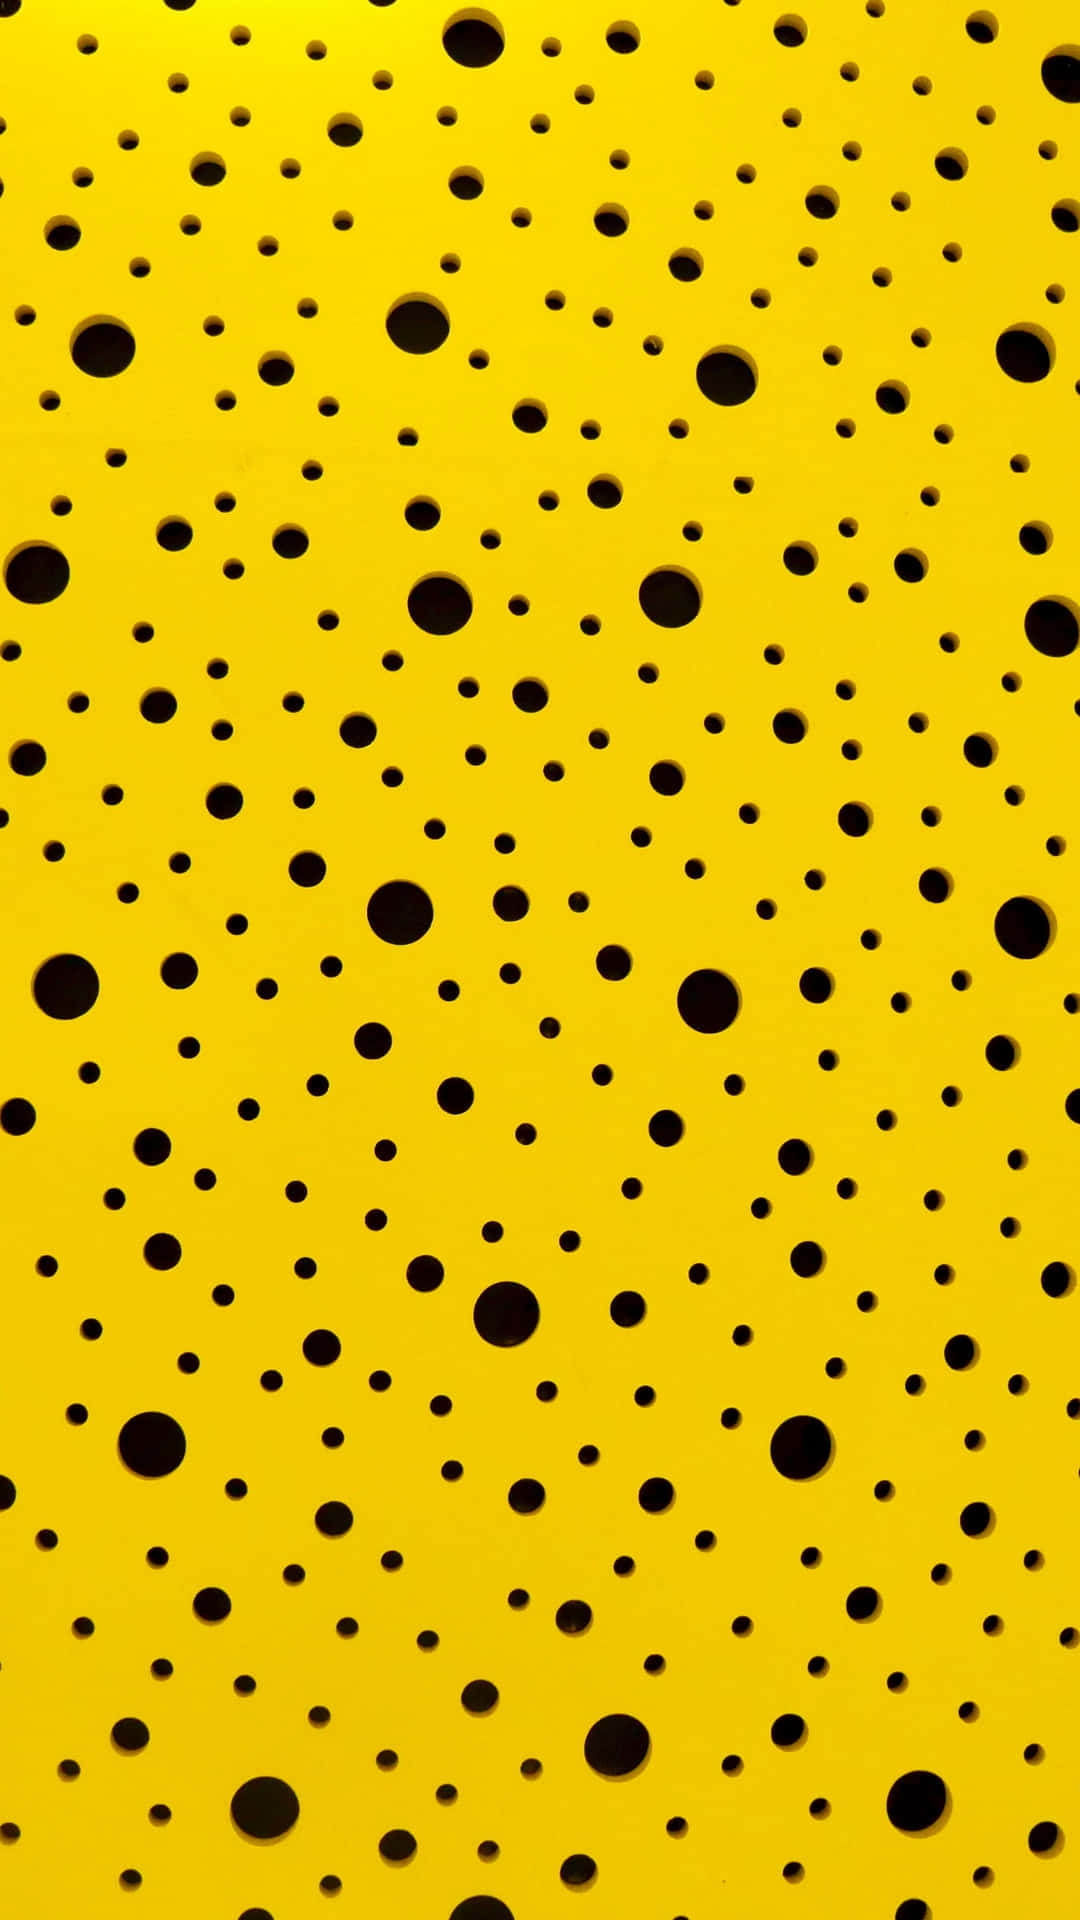 Connecting the Dots Wallpaper